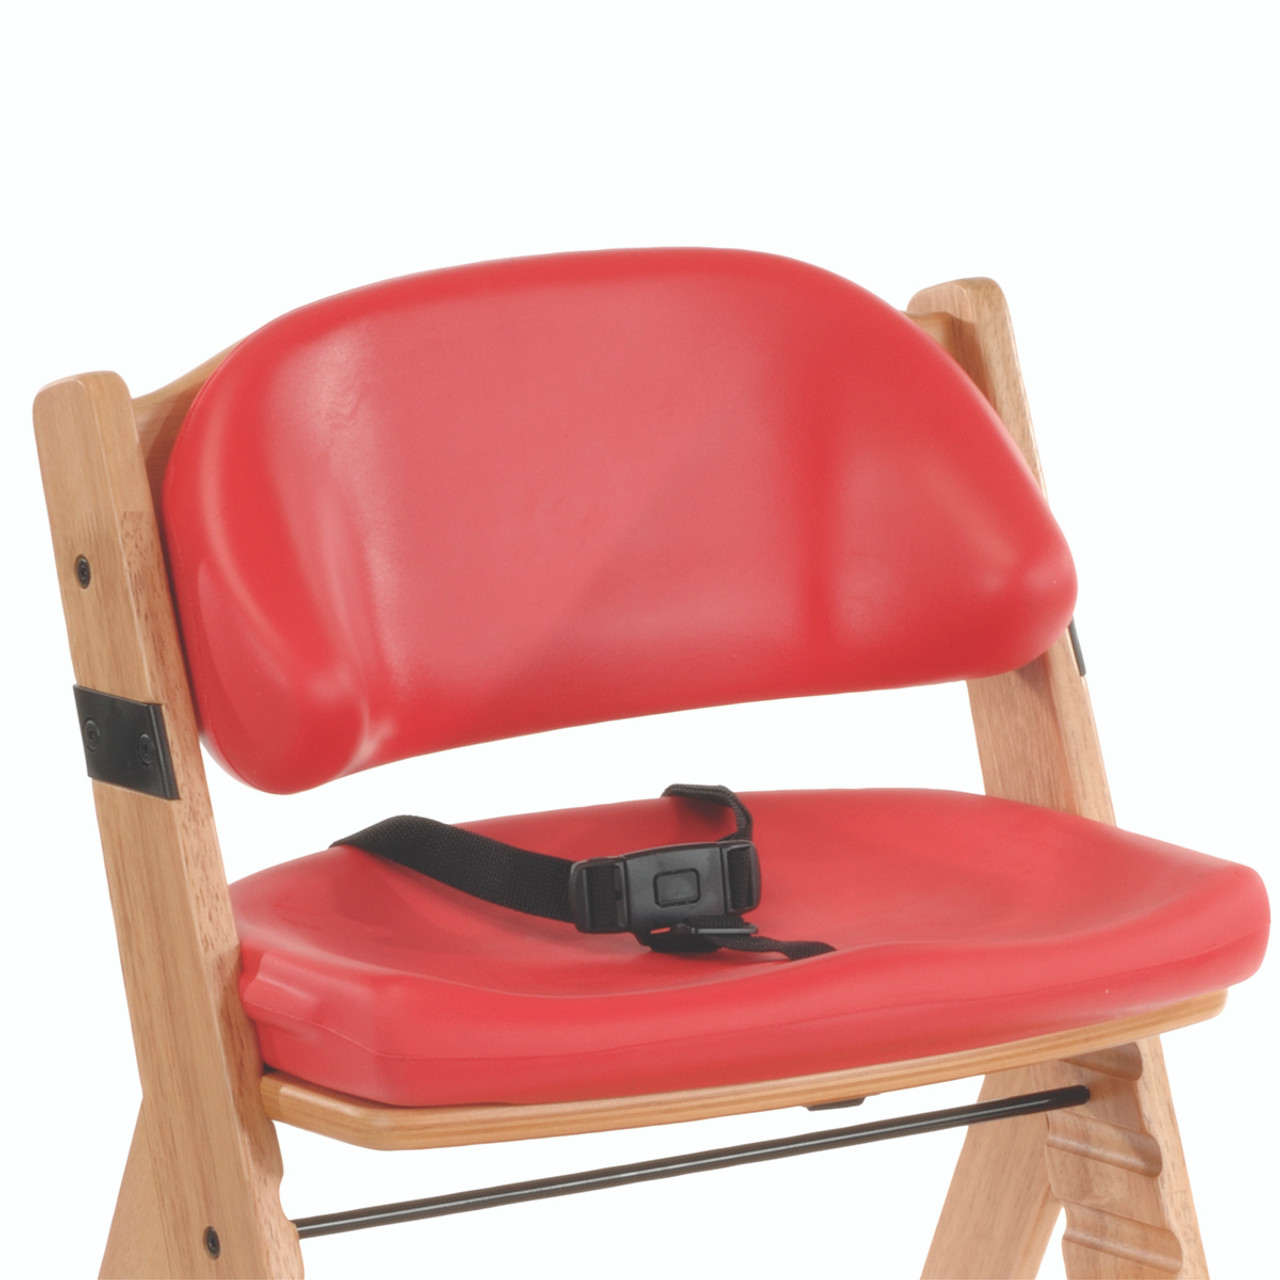 Special Tomato¨ Soft-Touchª - seat liner - size 2 - red